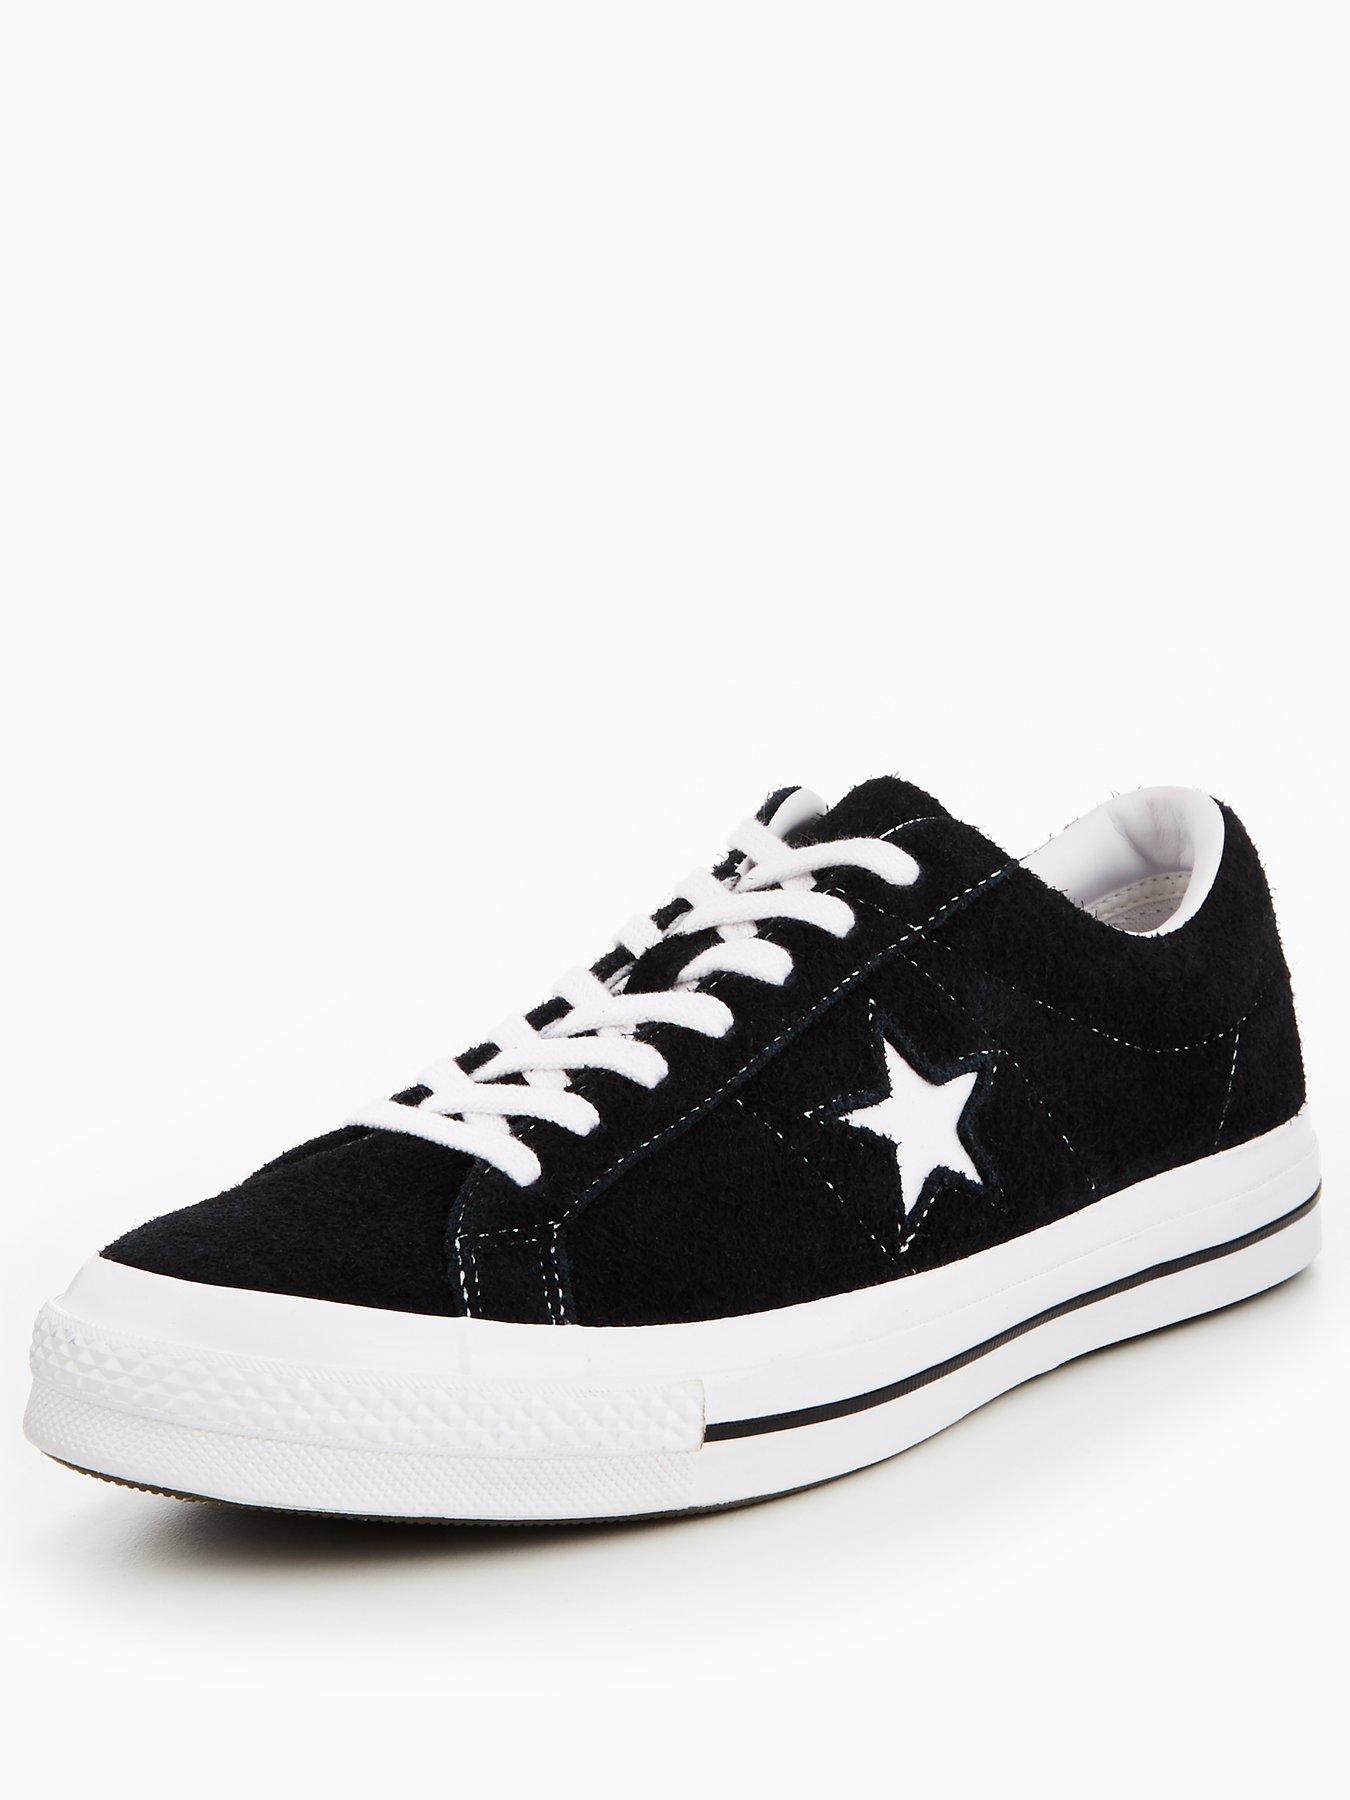 Converse Shoes Drawing at GetDrawings | Free download